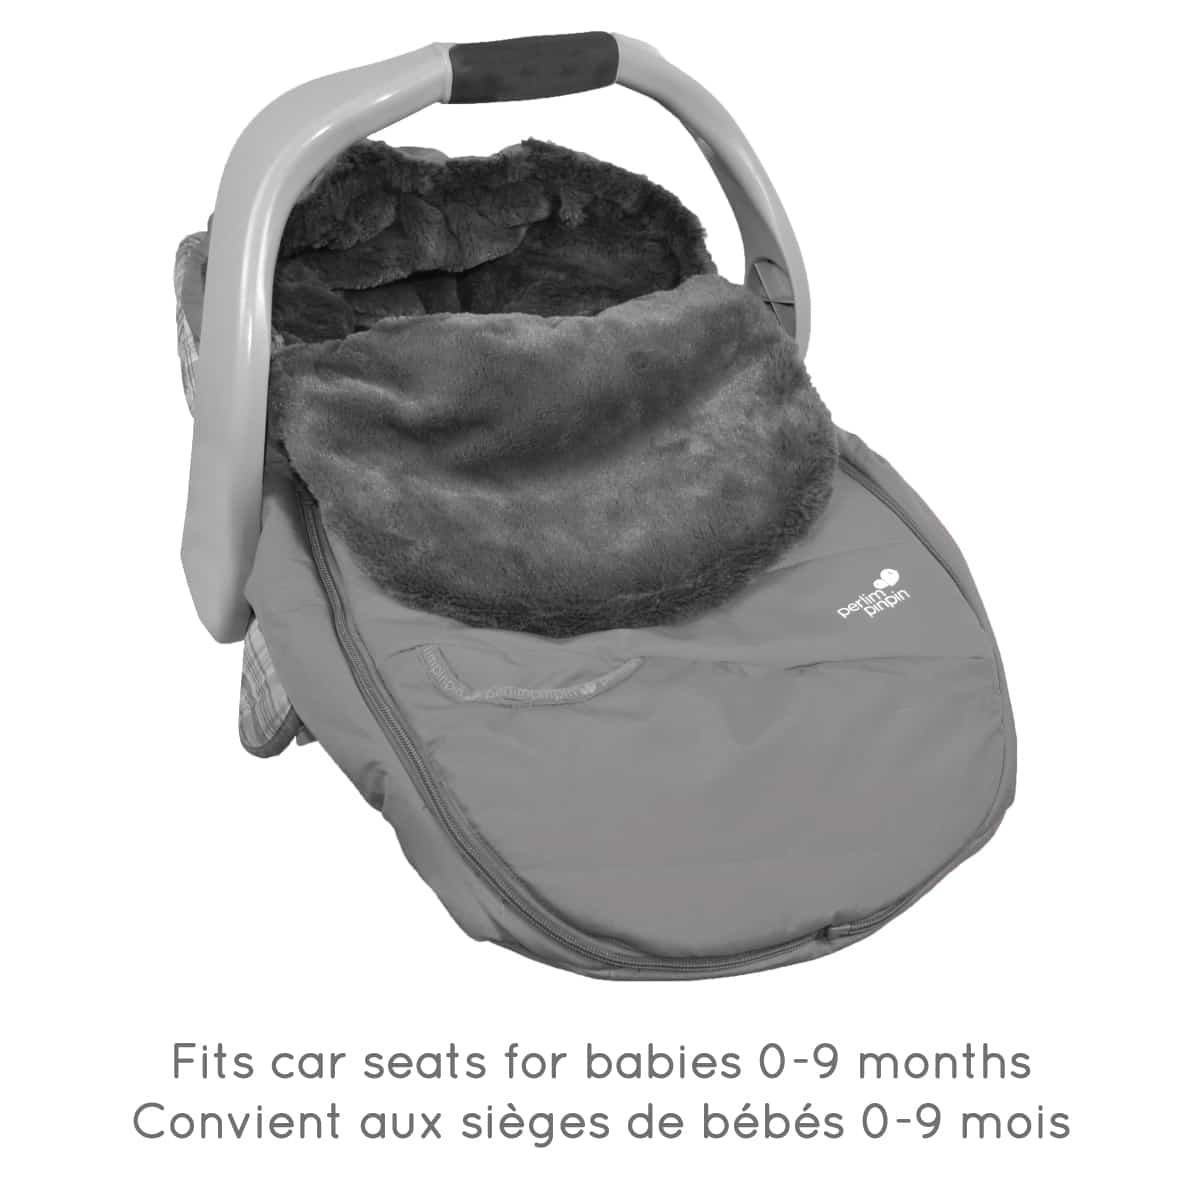 Baby car seat cover for winter - Walrus